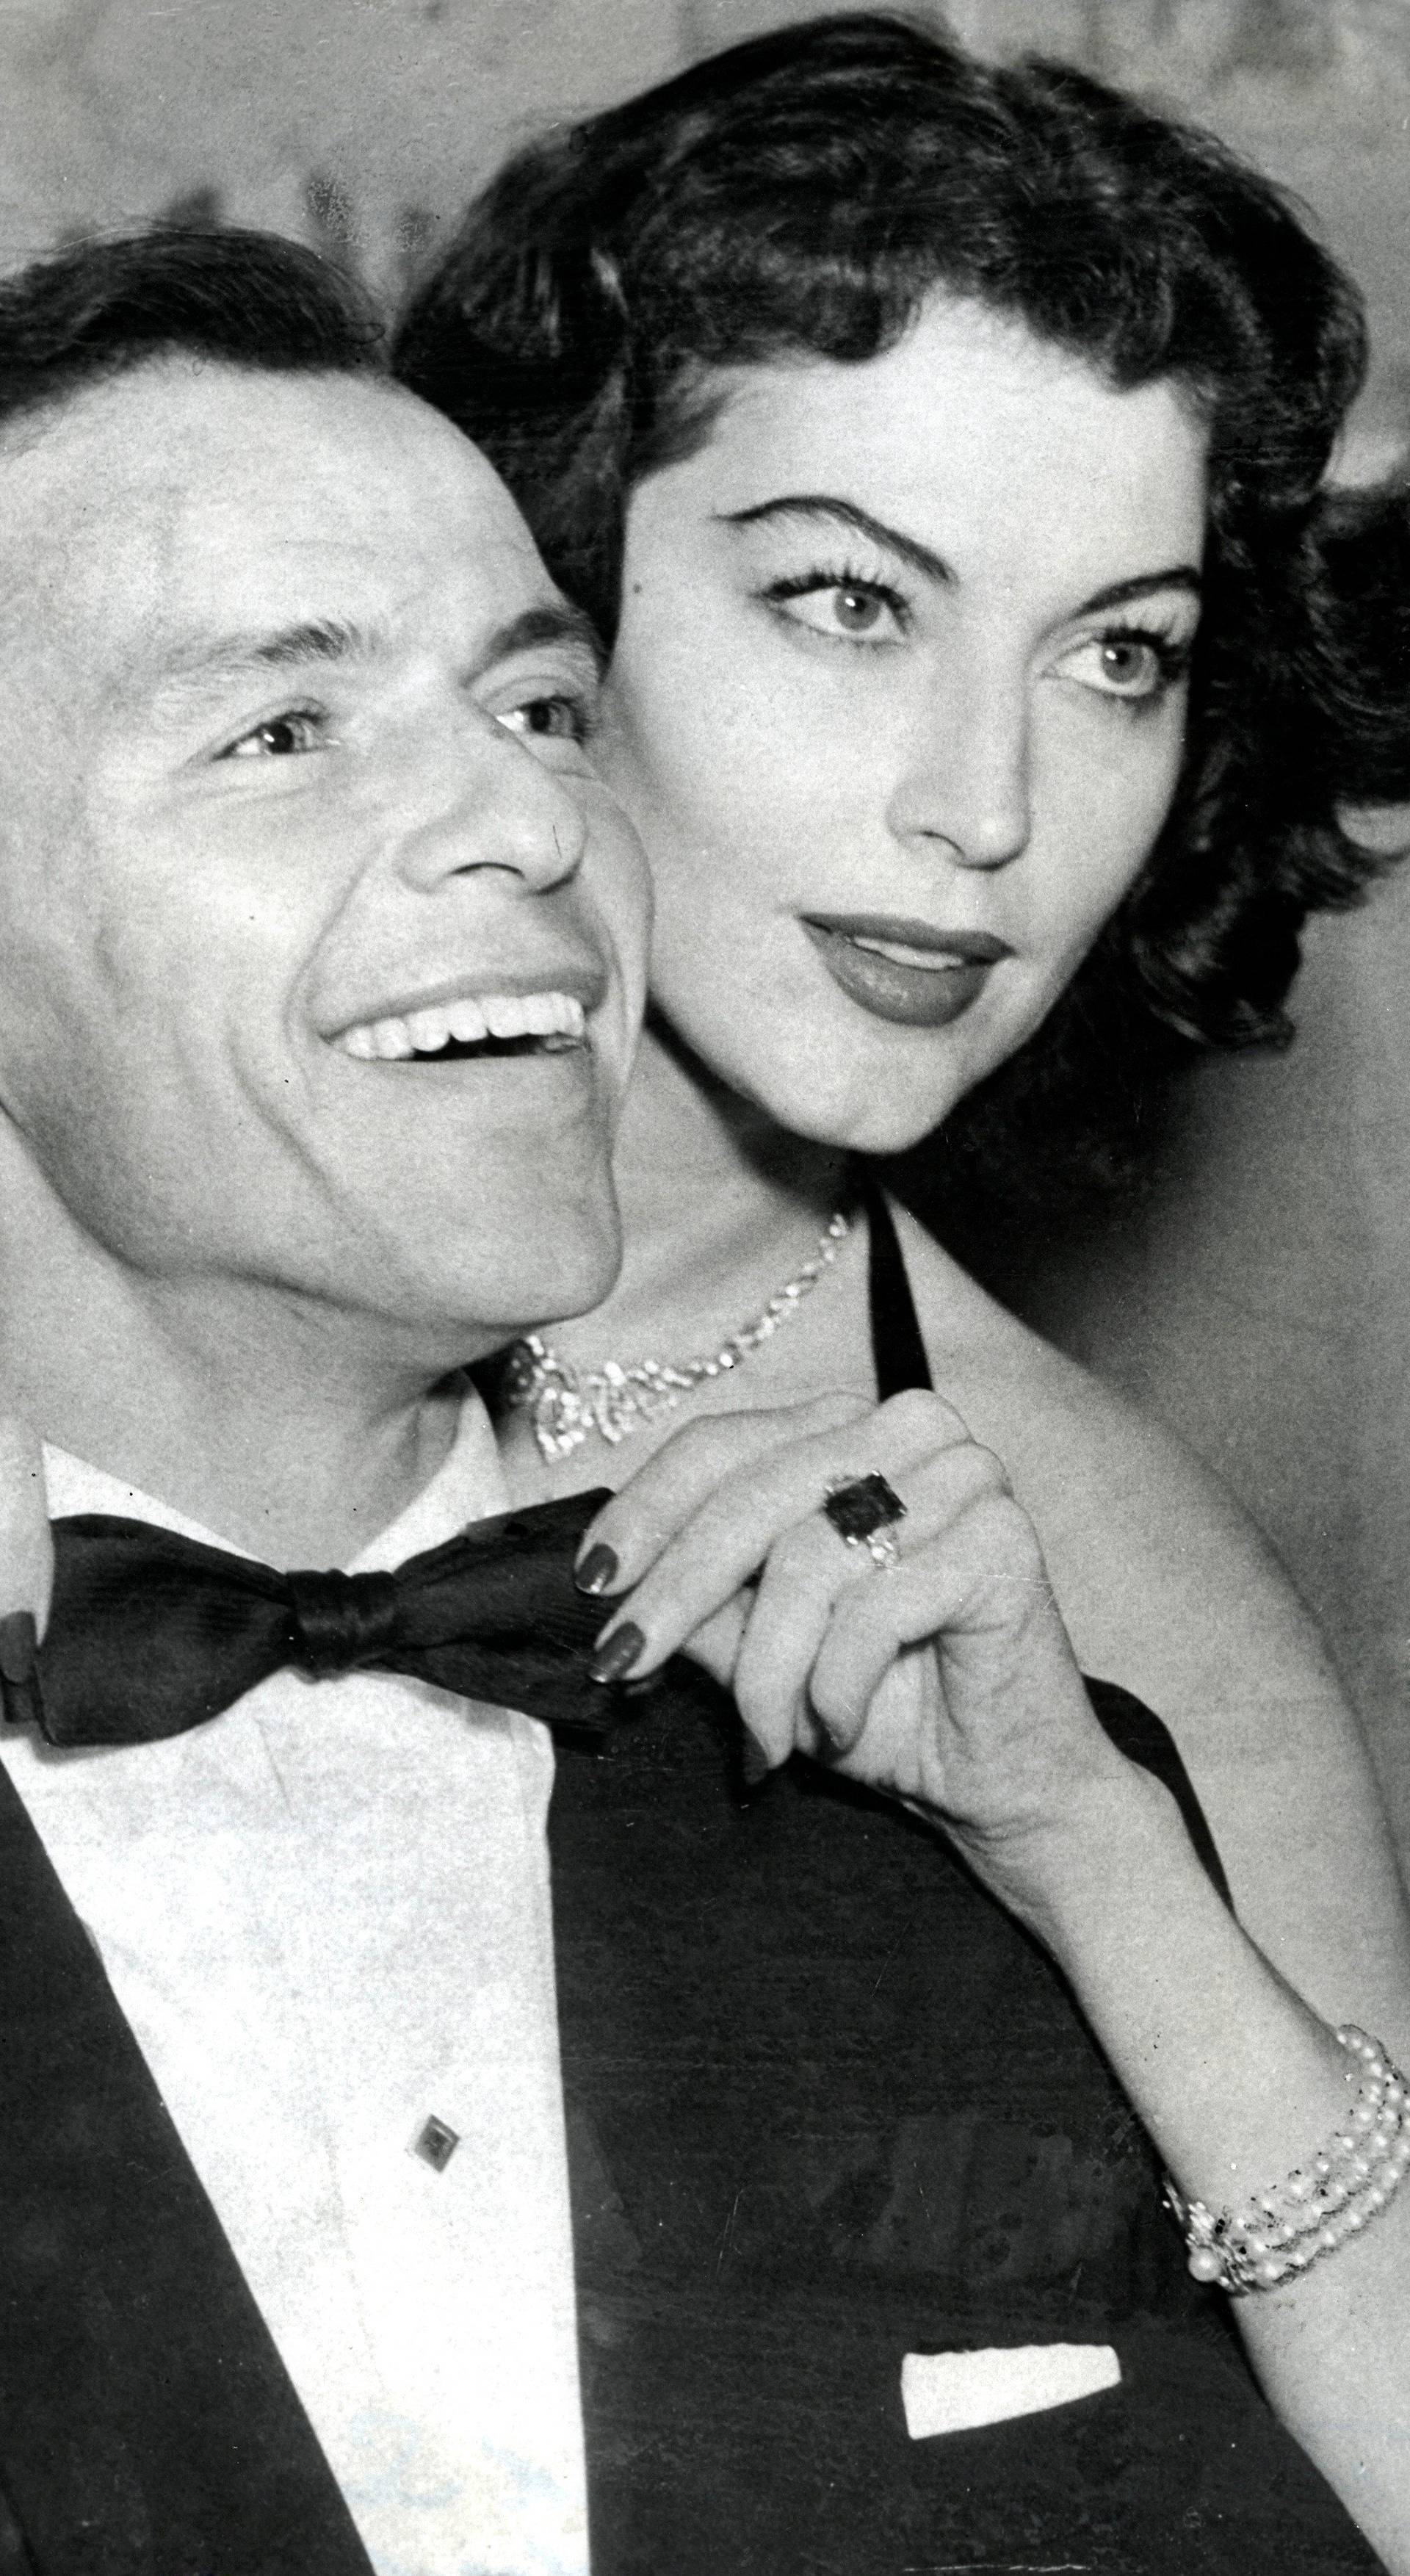 Frank Sinatra with his wife Ava Gardner 1951